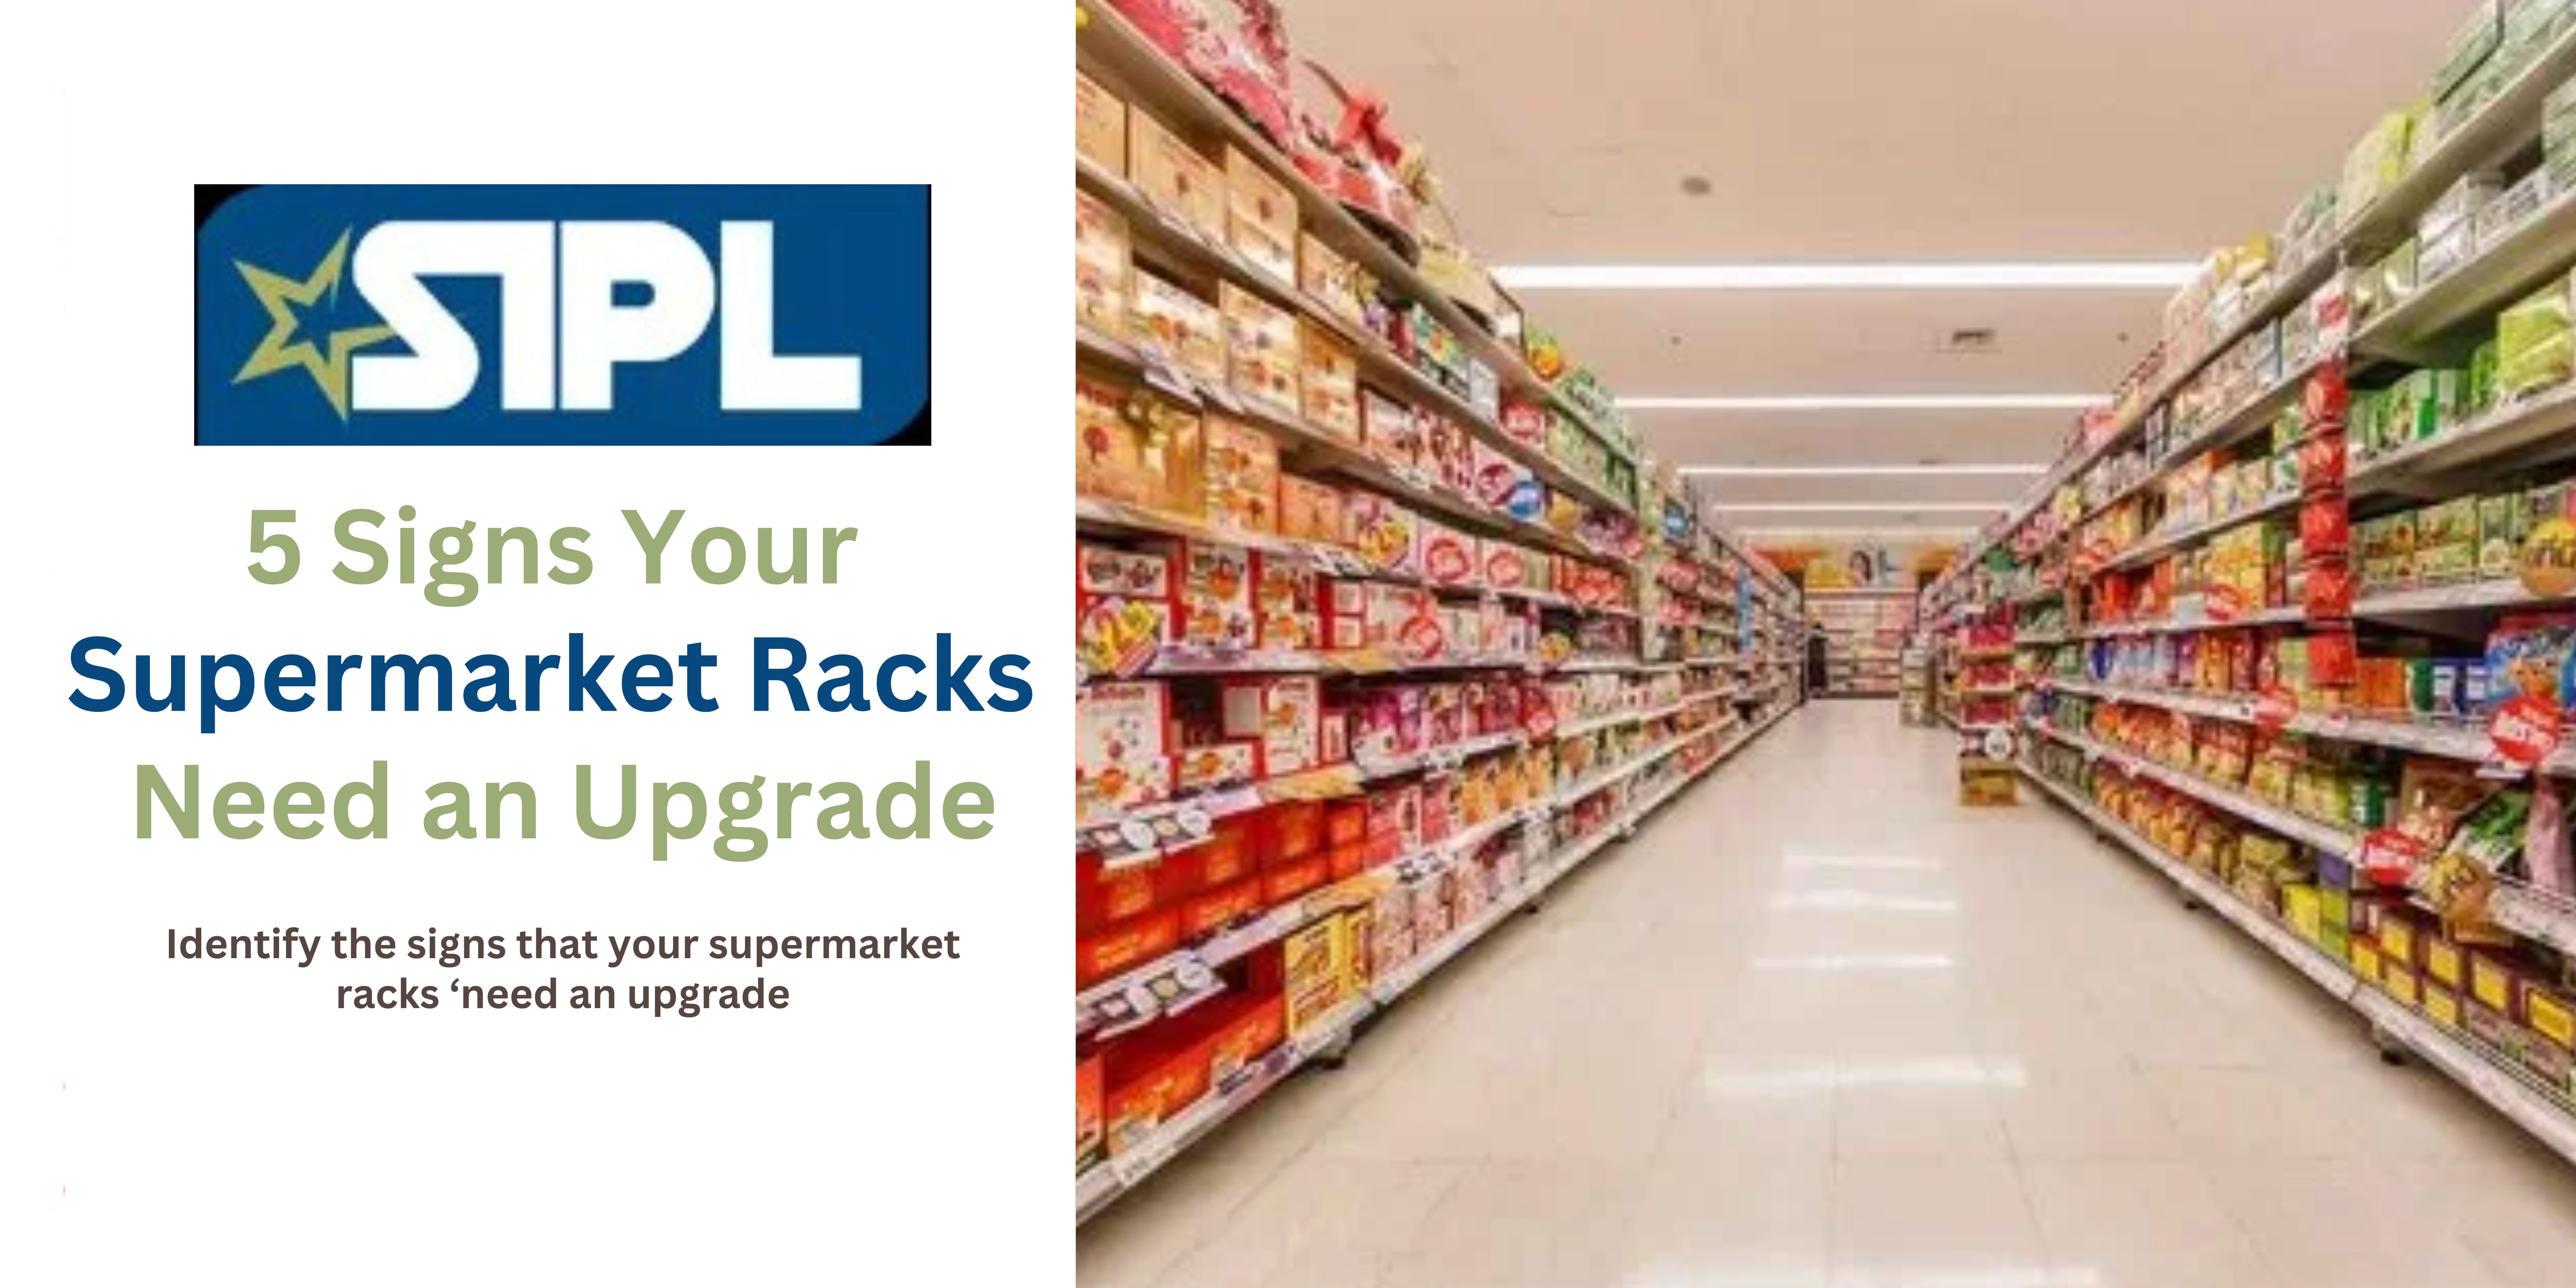 5 Signs Your Supermarket Racks Need an Upgrade